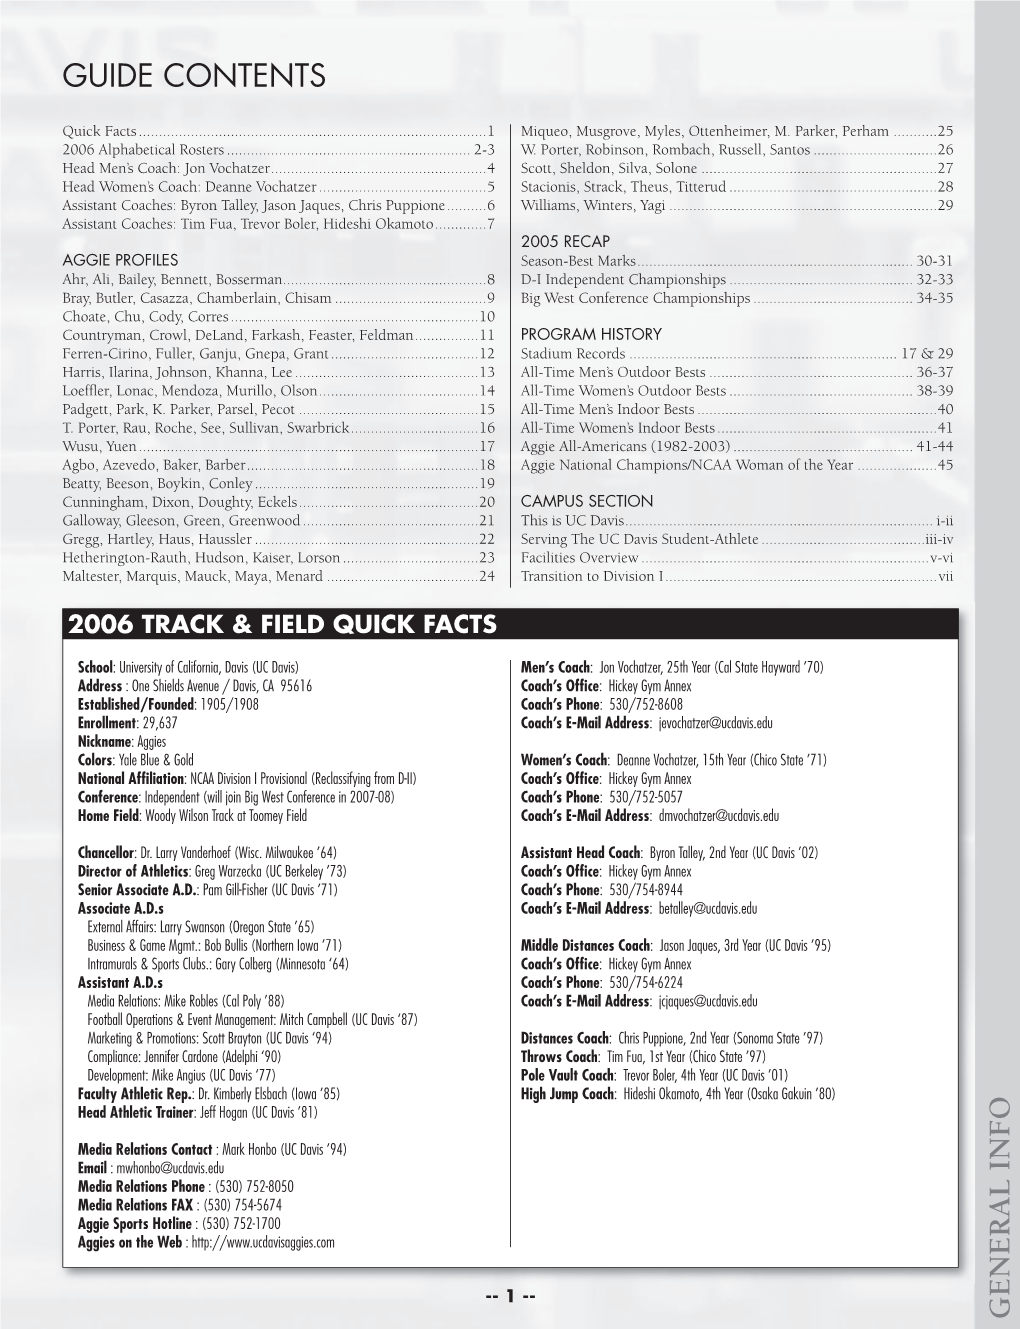 '06 Track Guide.Indd